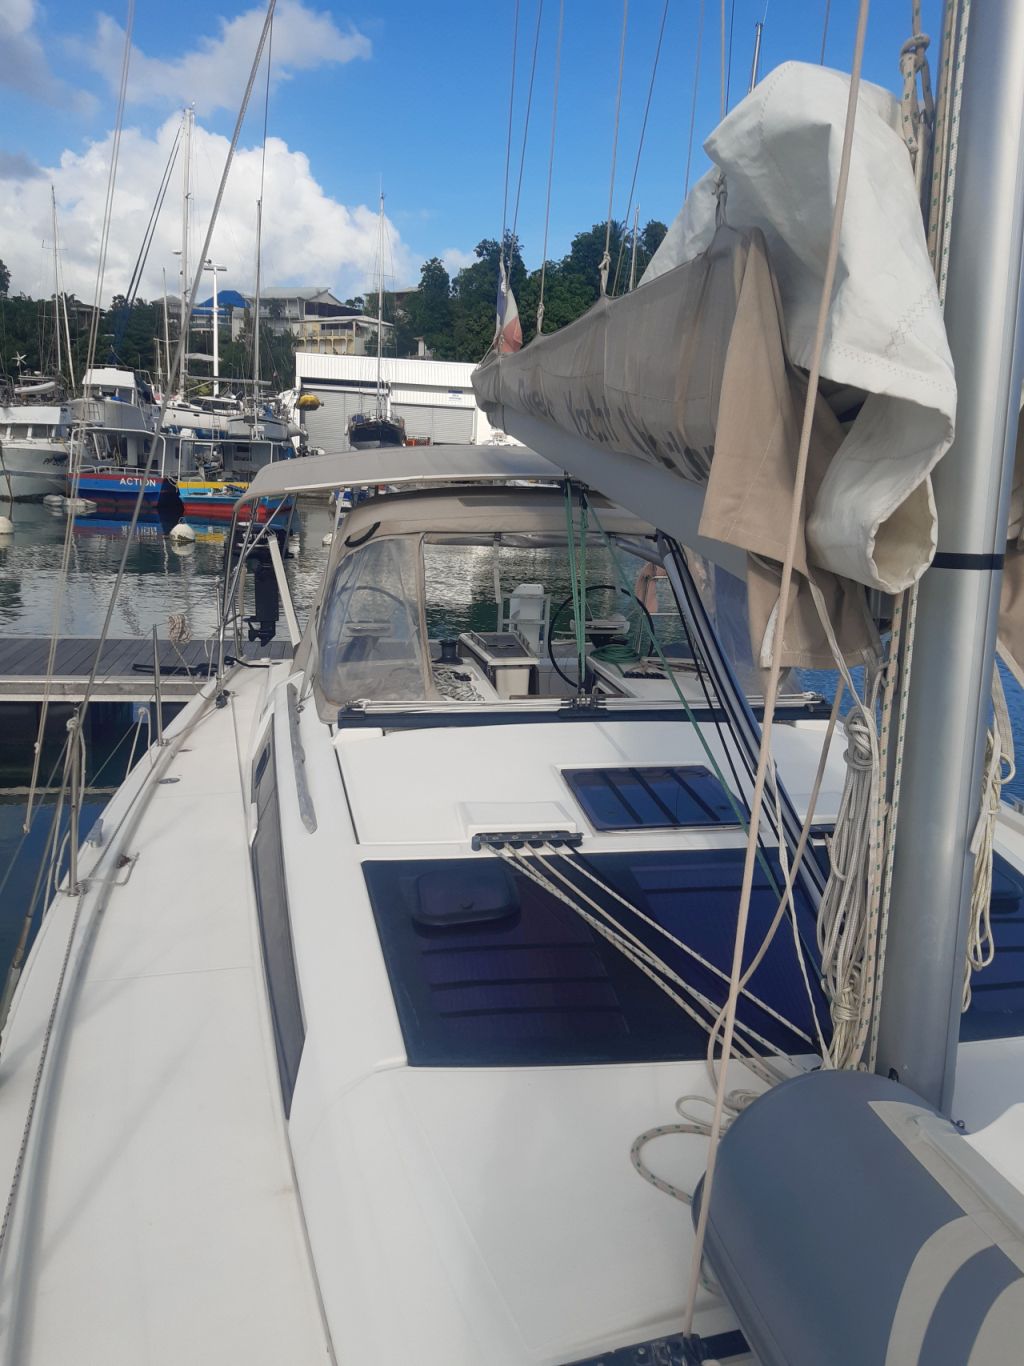 Dufour 390 GL - Sailboat Charter Guadeloupe & Boat hire in Guadeloupe Pointe a Pitre Marina de Bas du Fort 4